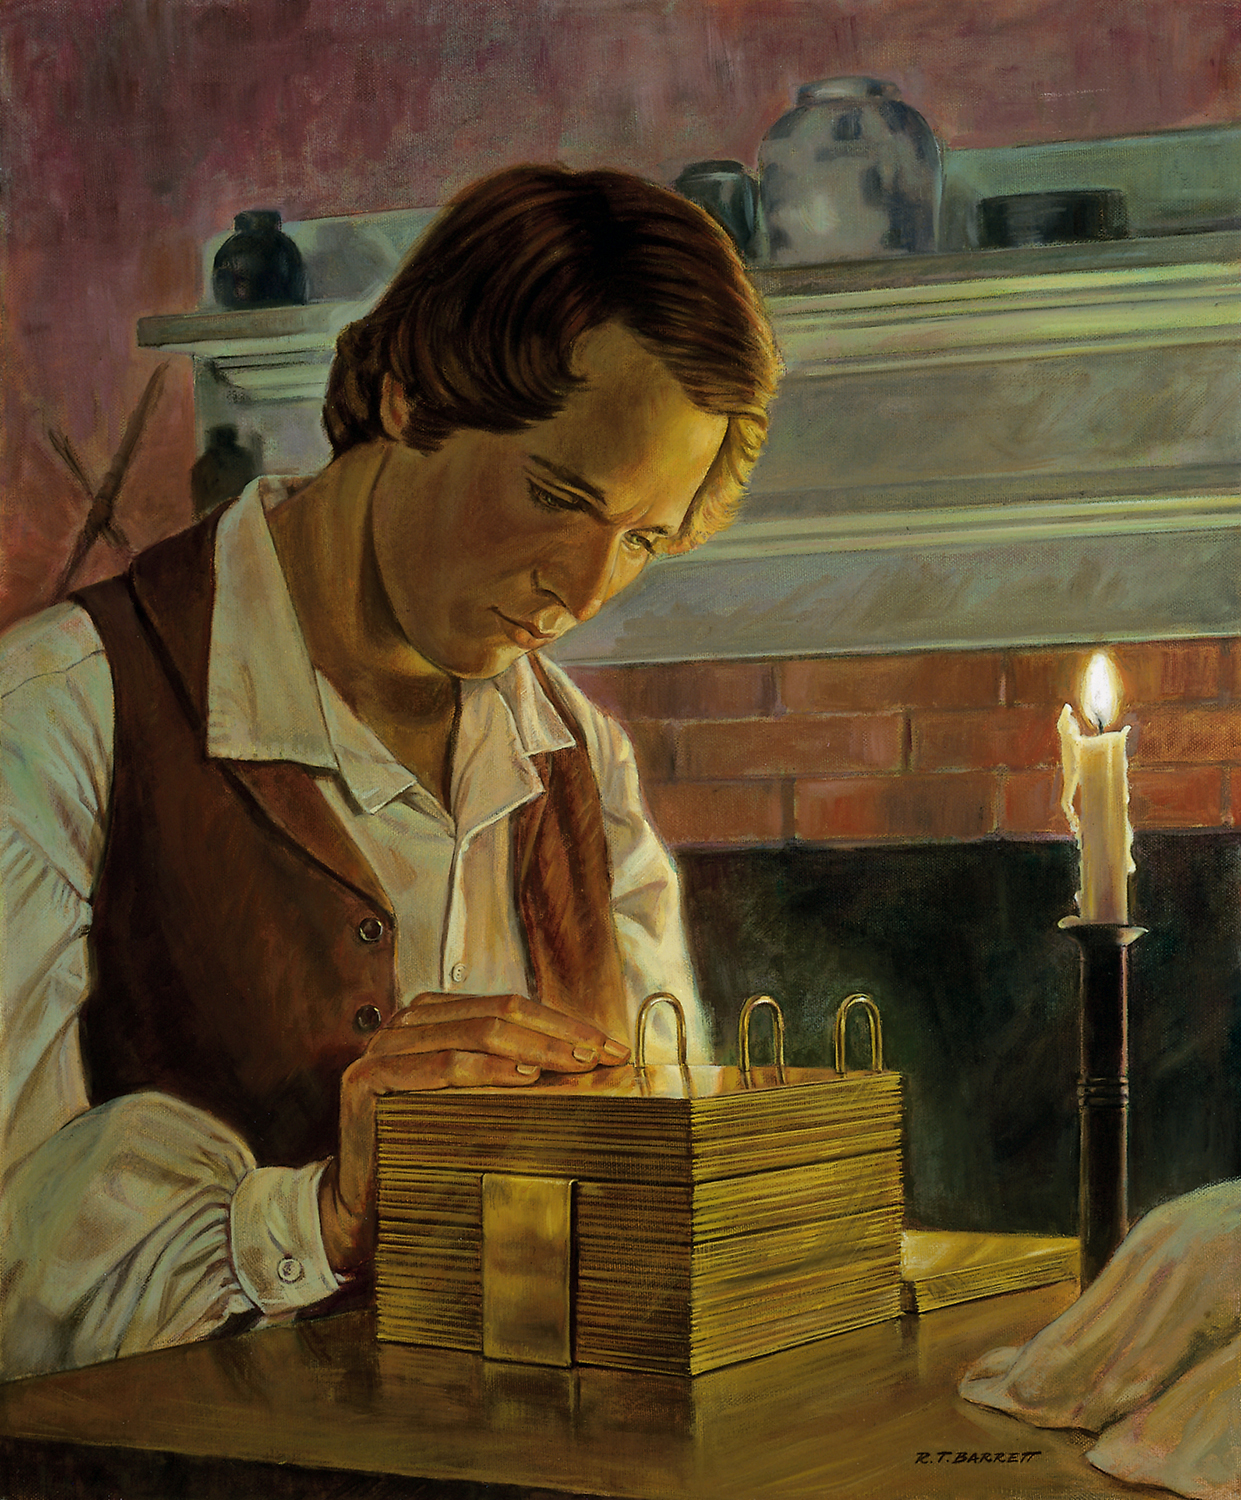 A painting of Joseph Smith with his hand on the plates as he reads.